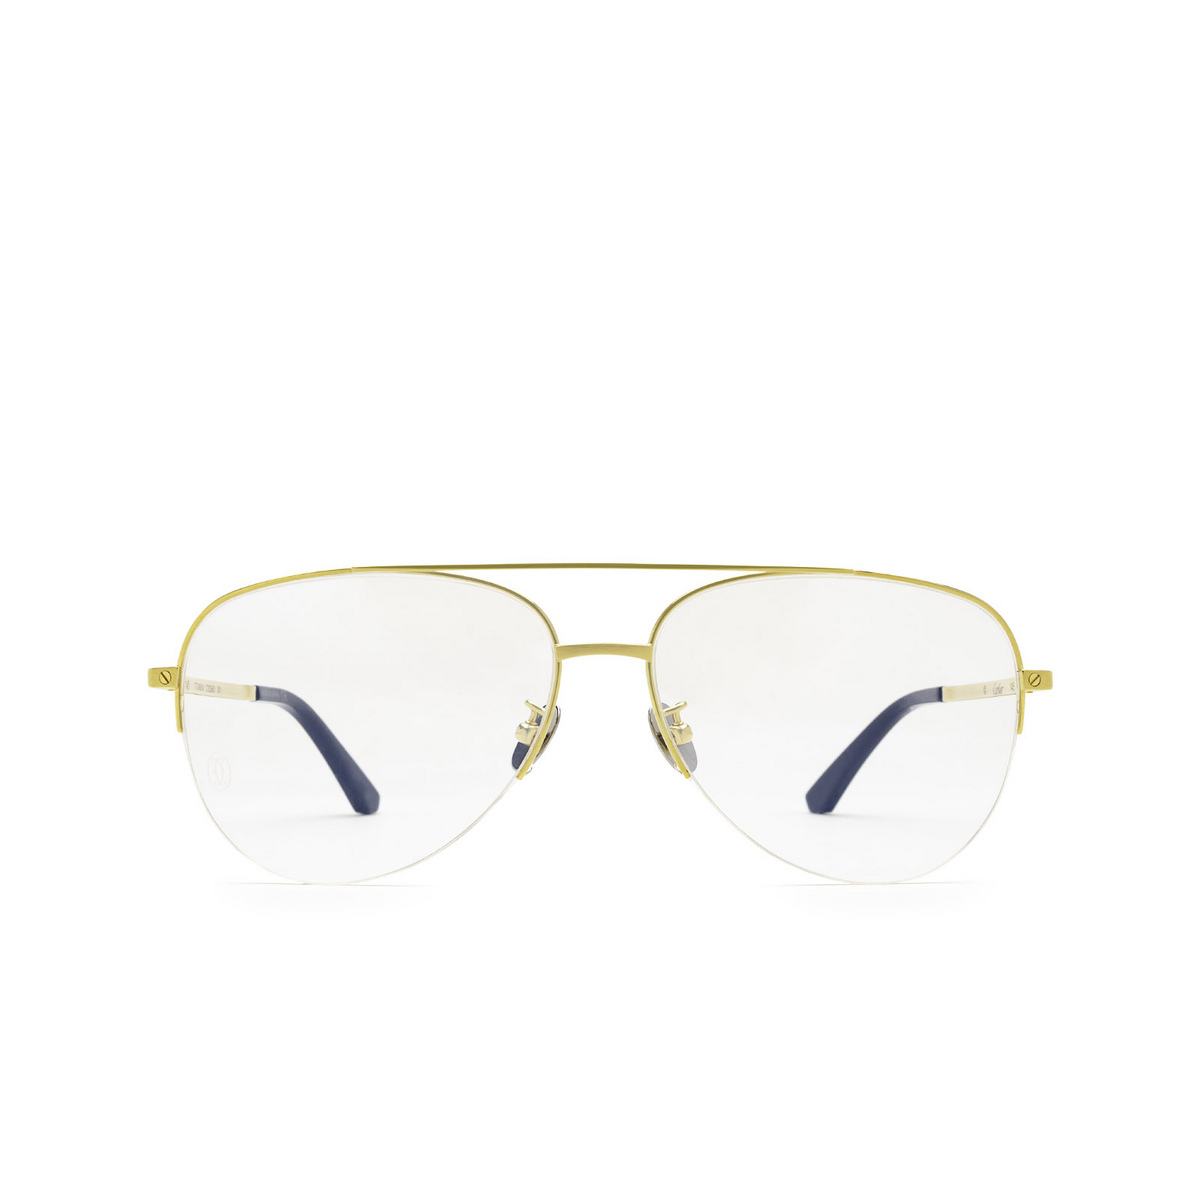 Cartier® Aviator Eyeglasses: CT0256O color Gold 001 - front view.